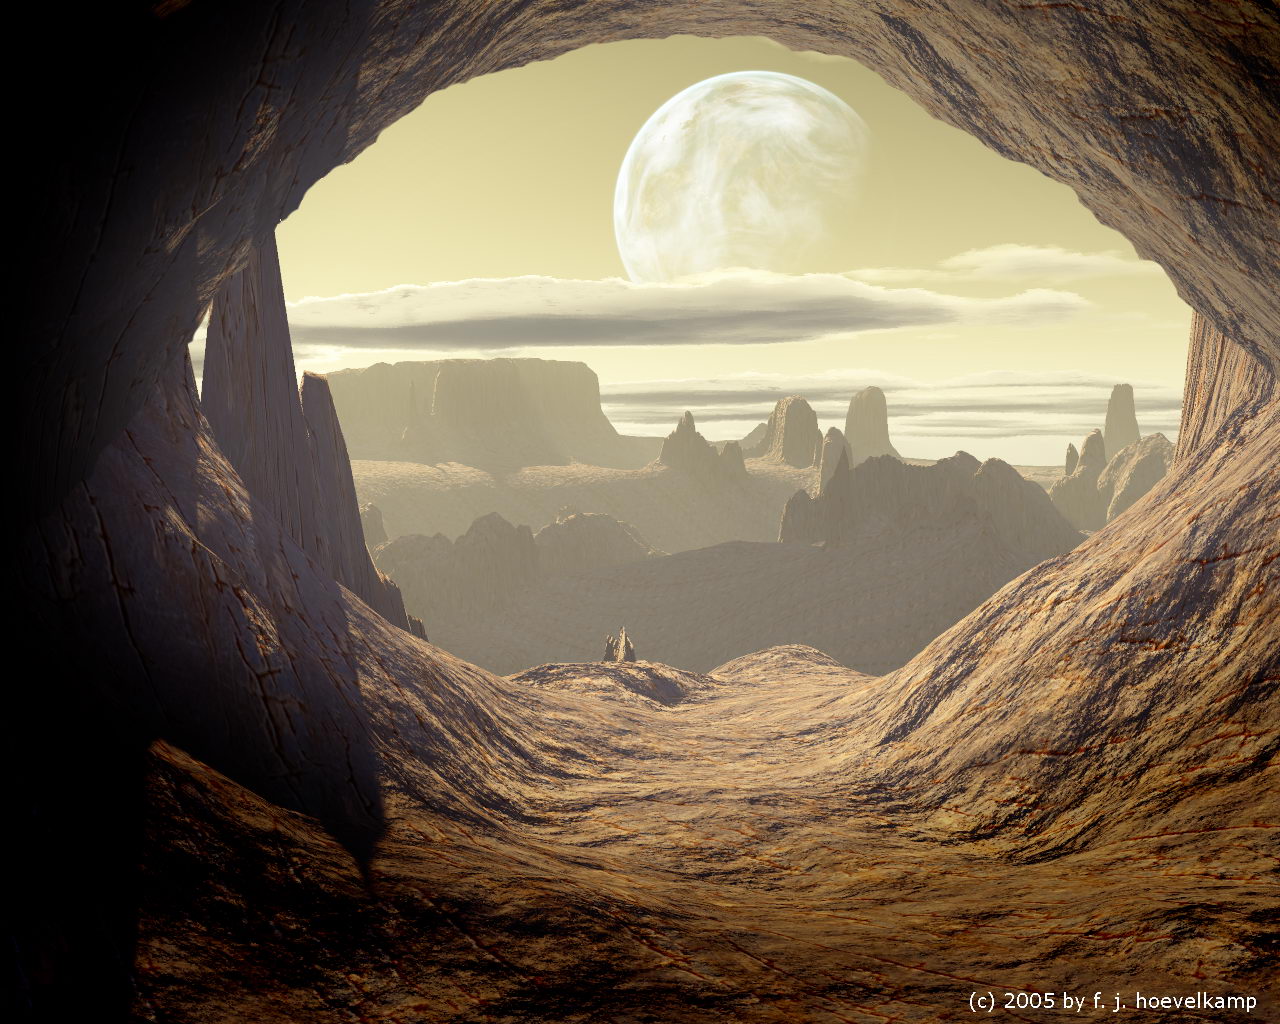 ... a cave on a desert planet by hoevelkamp